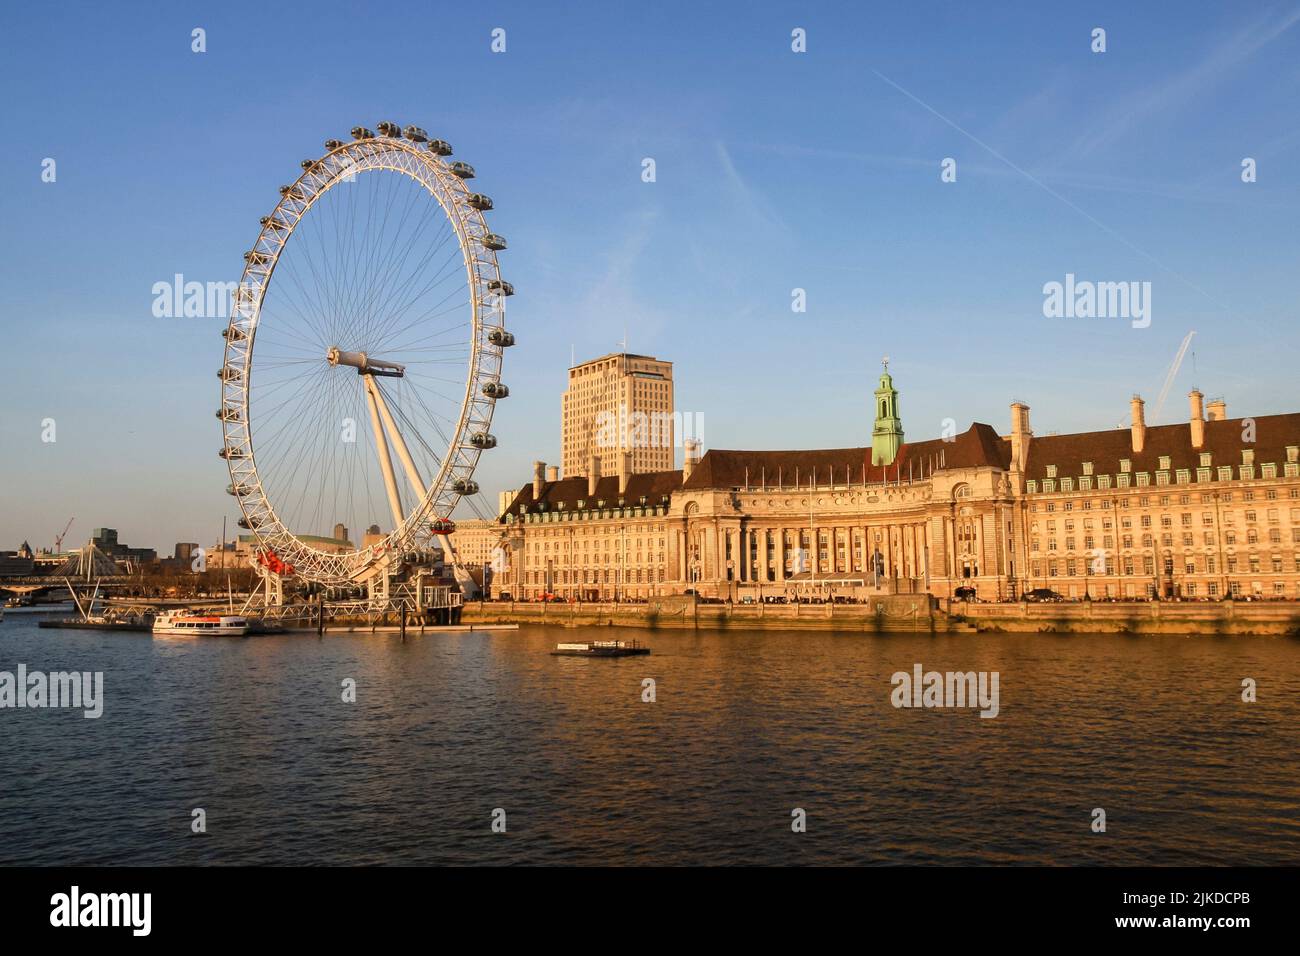 London, England - Aril 1, 2012: The London Eye, or the Millennium Wheel, is a cantilevered observation wheel (ferris wheel) on the South Bank of the Stock Photo